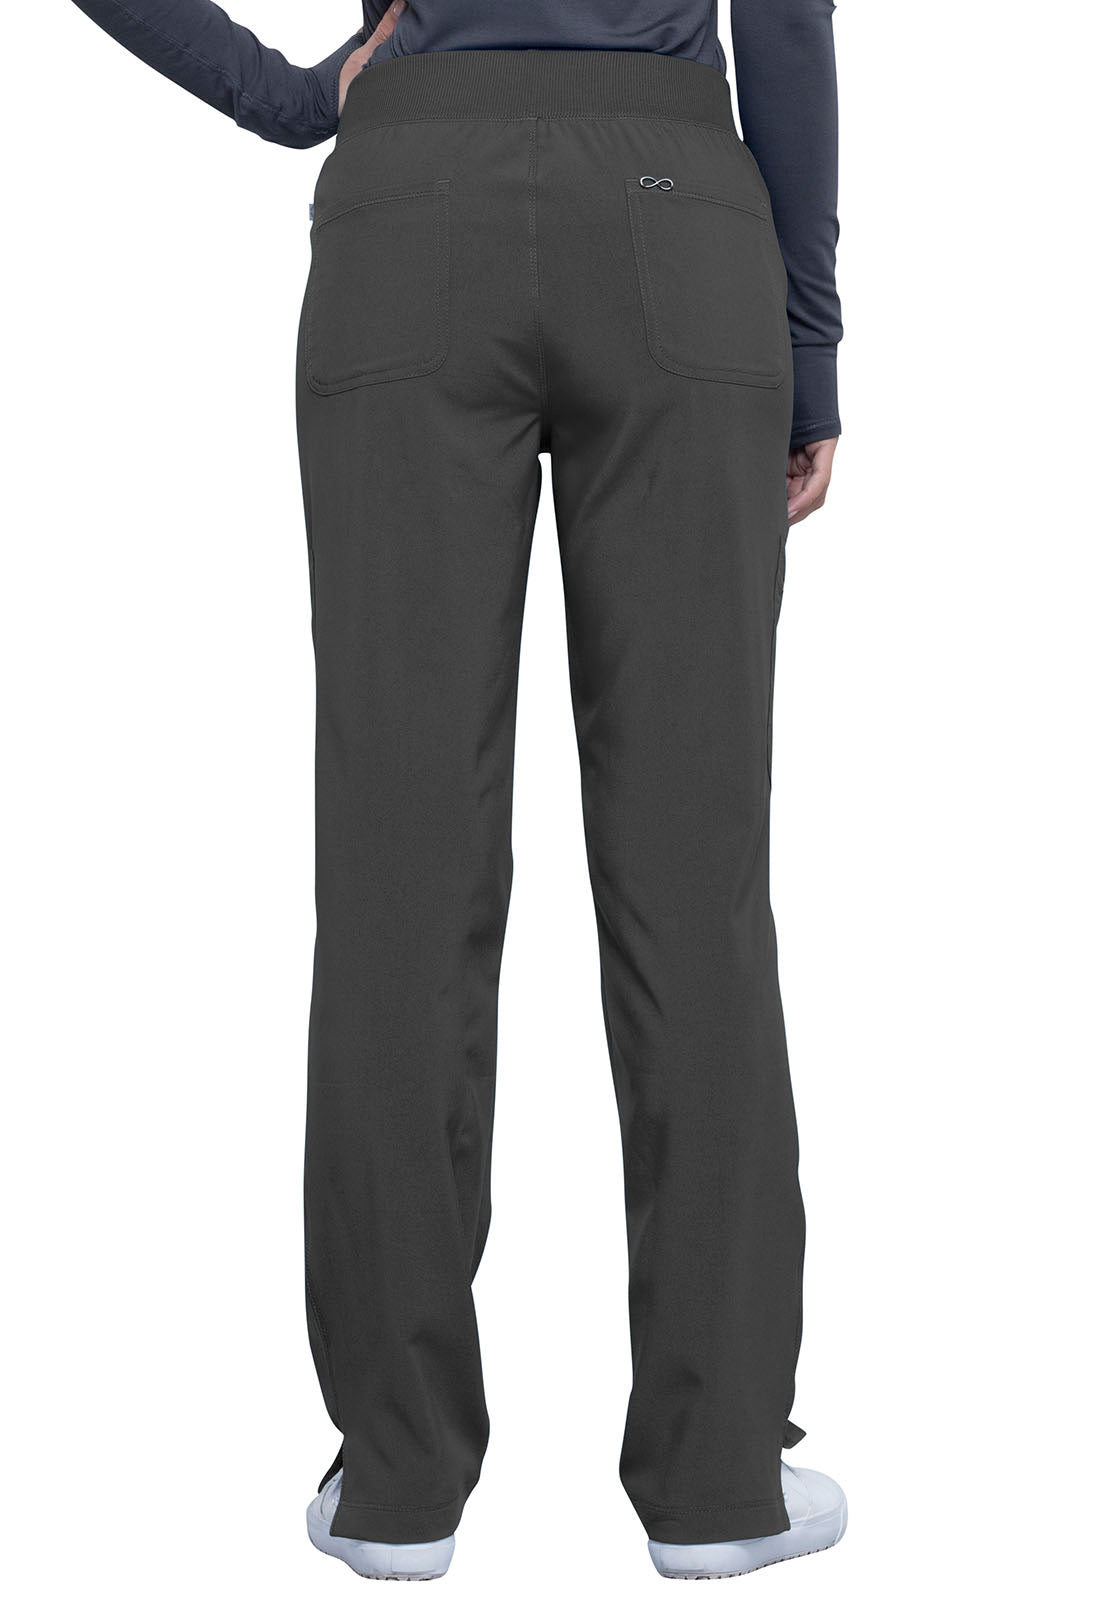 Cherokee Infinity CK065A Women's Pant TALL pewter grey 